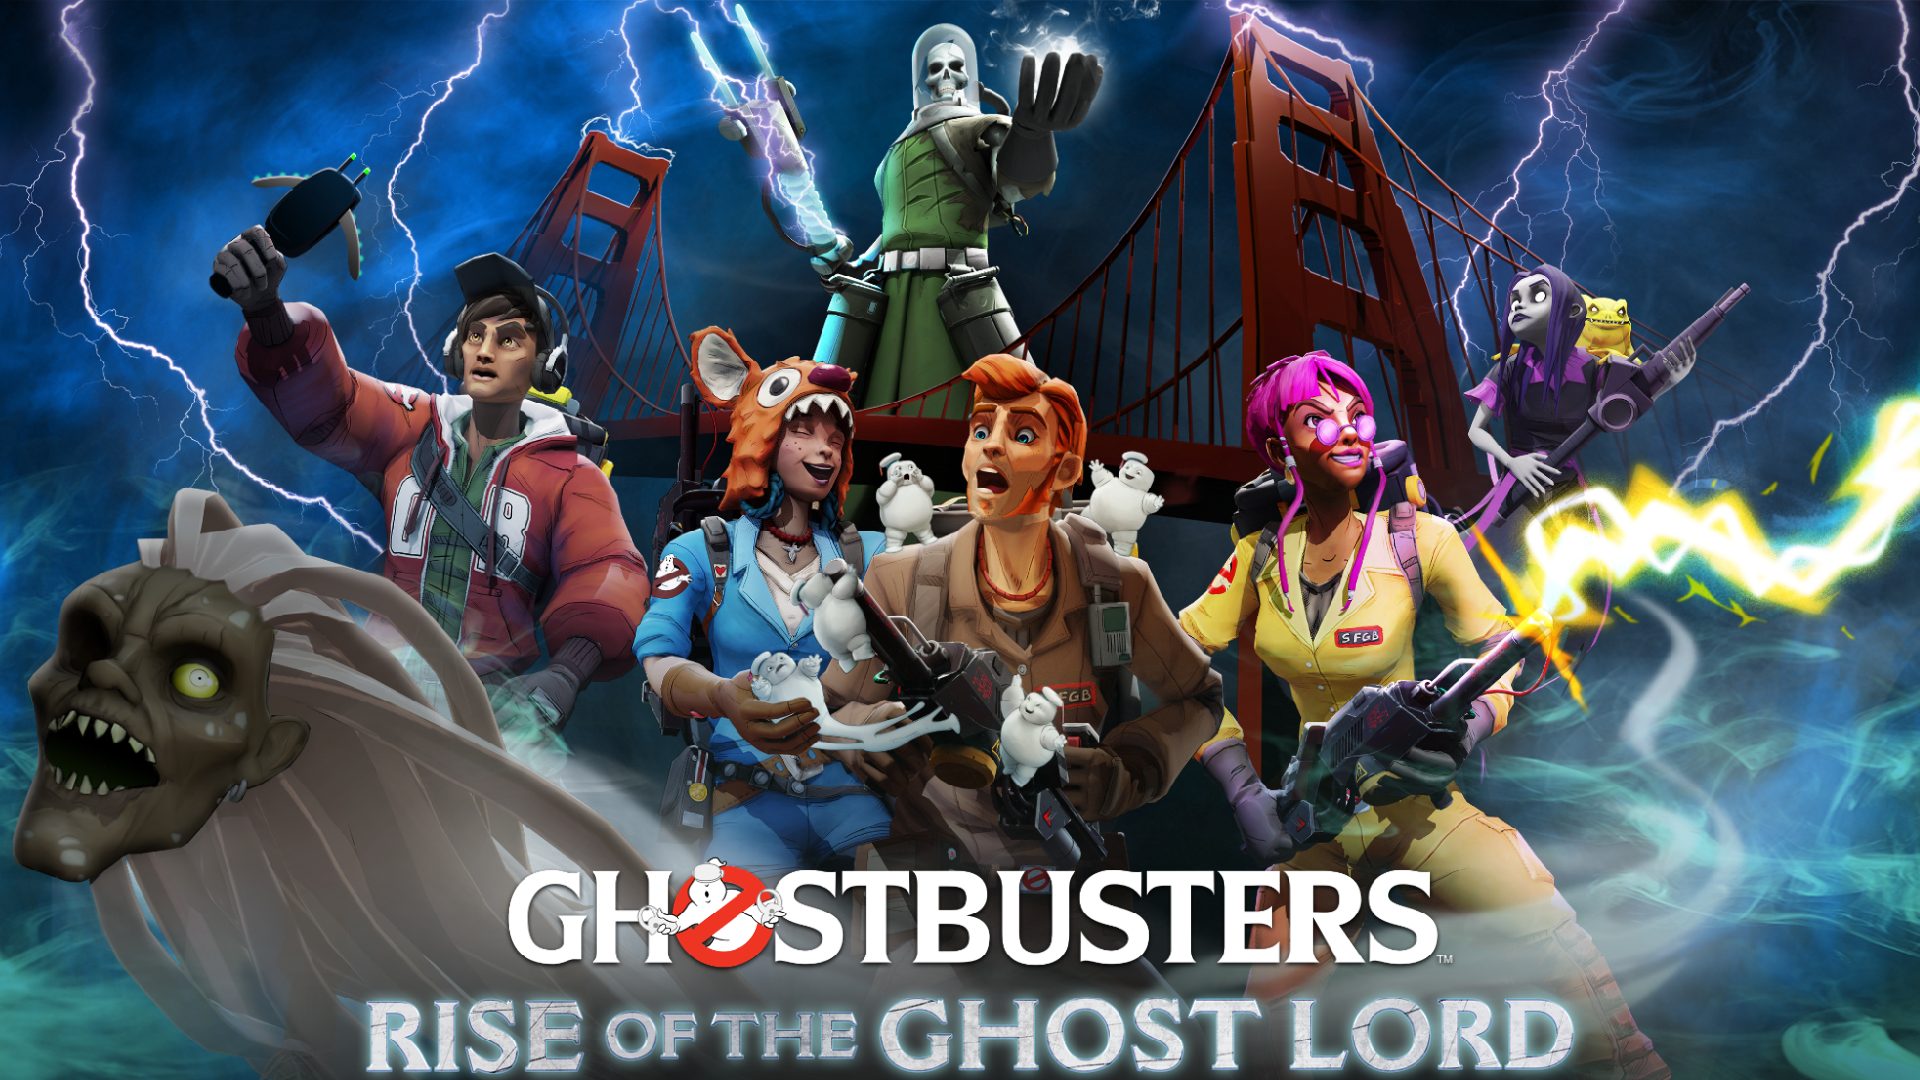 Jeu Art of Oculus Quest 2 'Ghostbusters: Rise of the Ghost Lord' avec personnages et logo